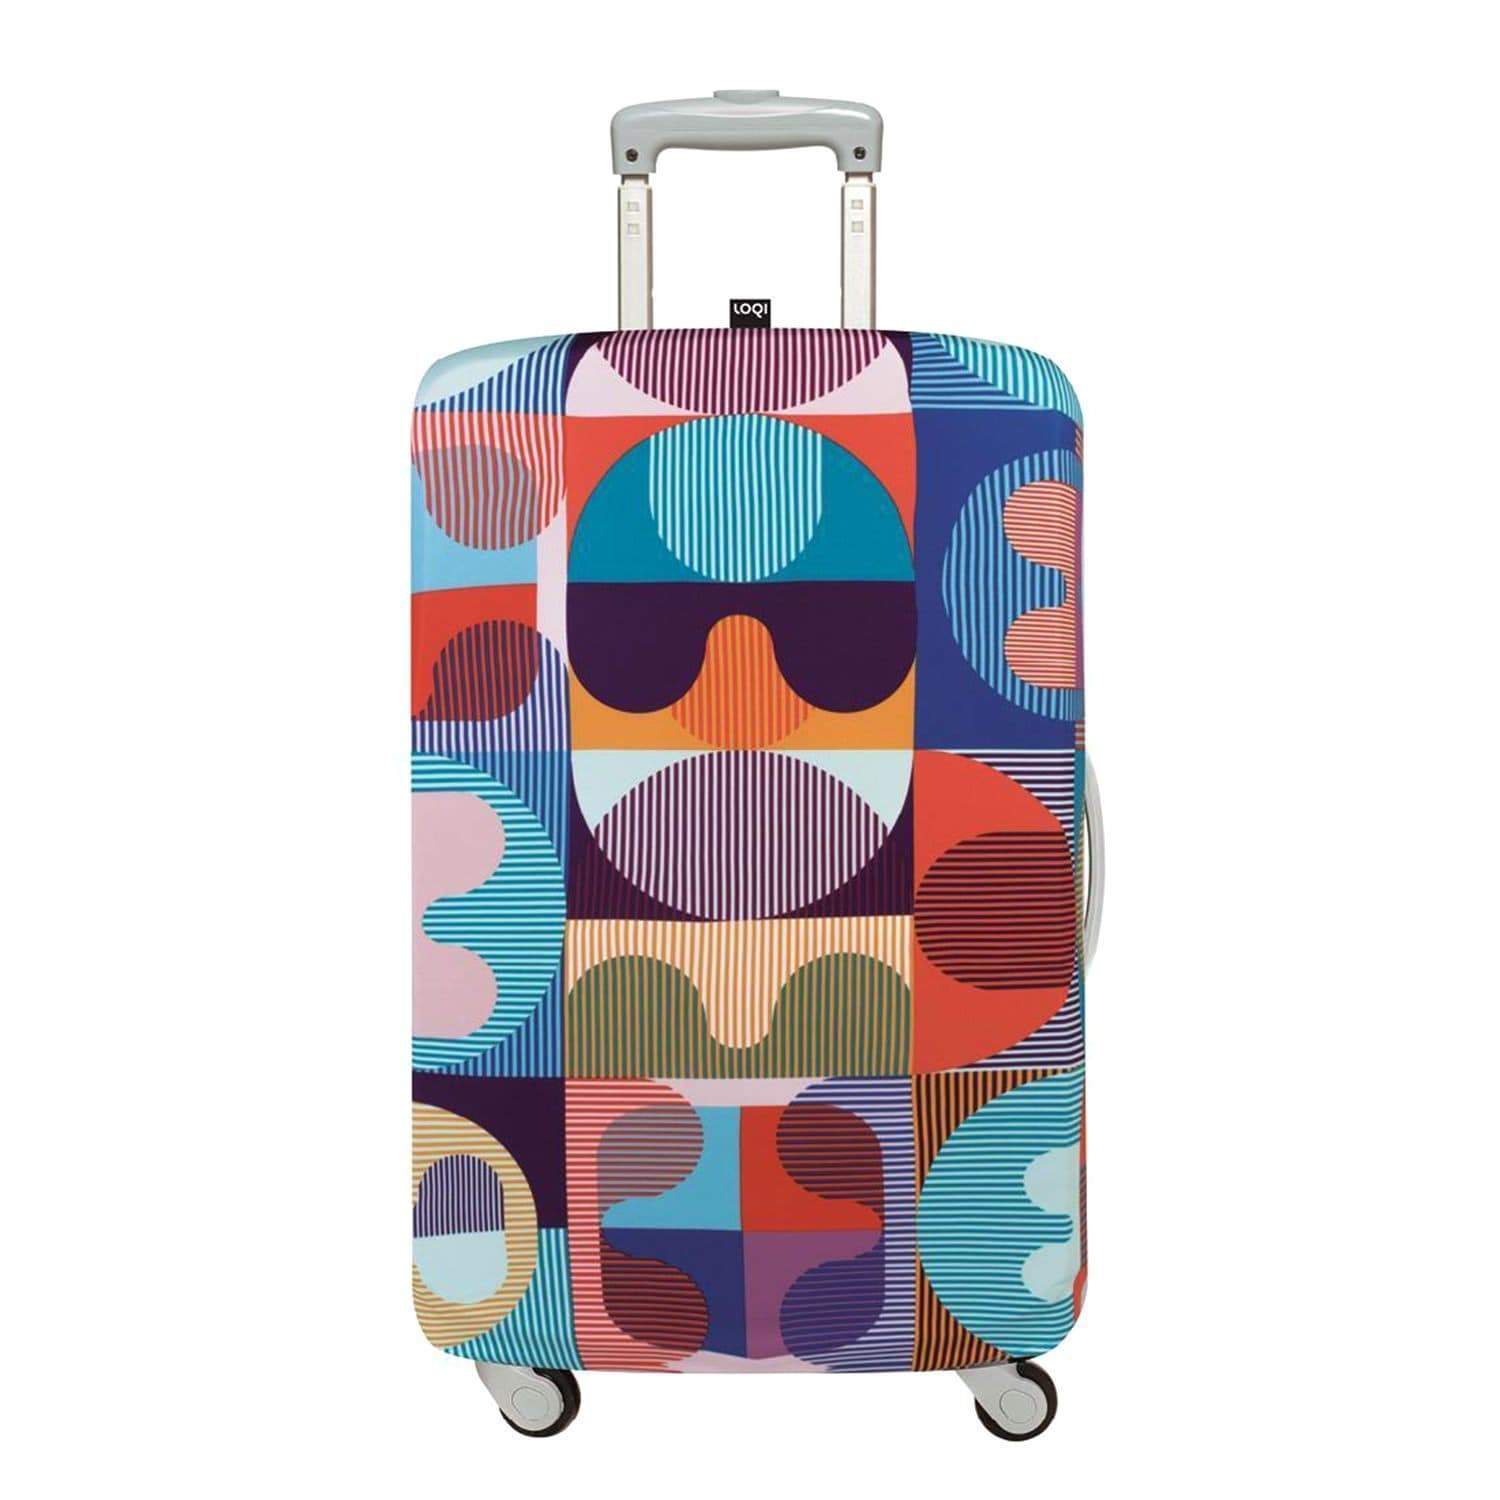 Loqi Artist Hvass and Hannibal Grid Luggage Cover - Multicolour, Small - LS.HH.GR - Jashanmal Home